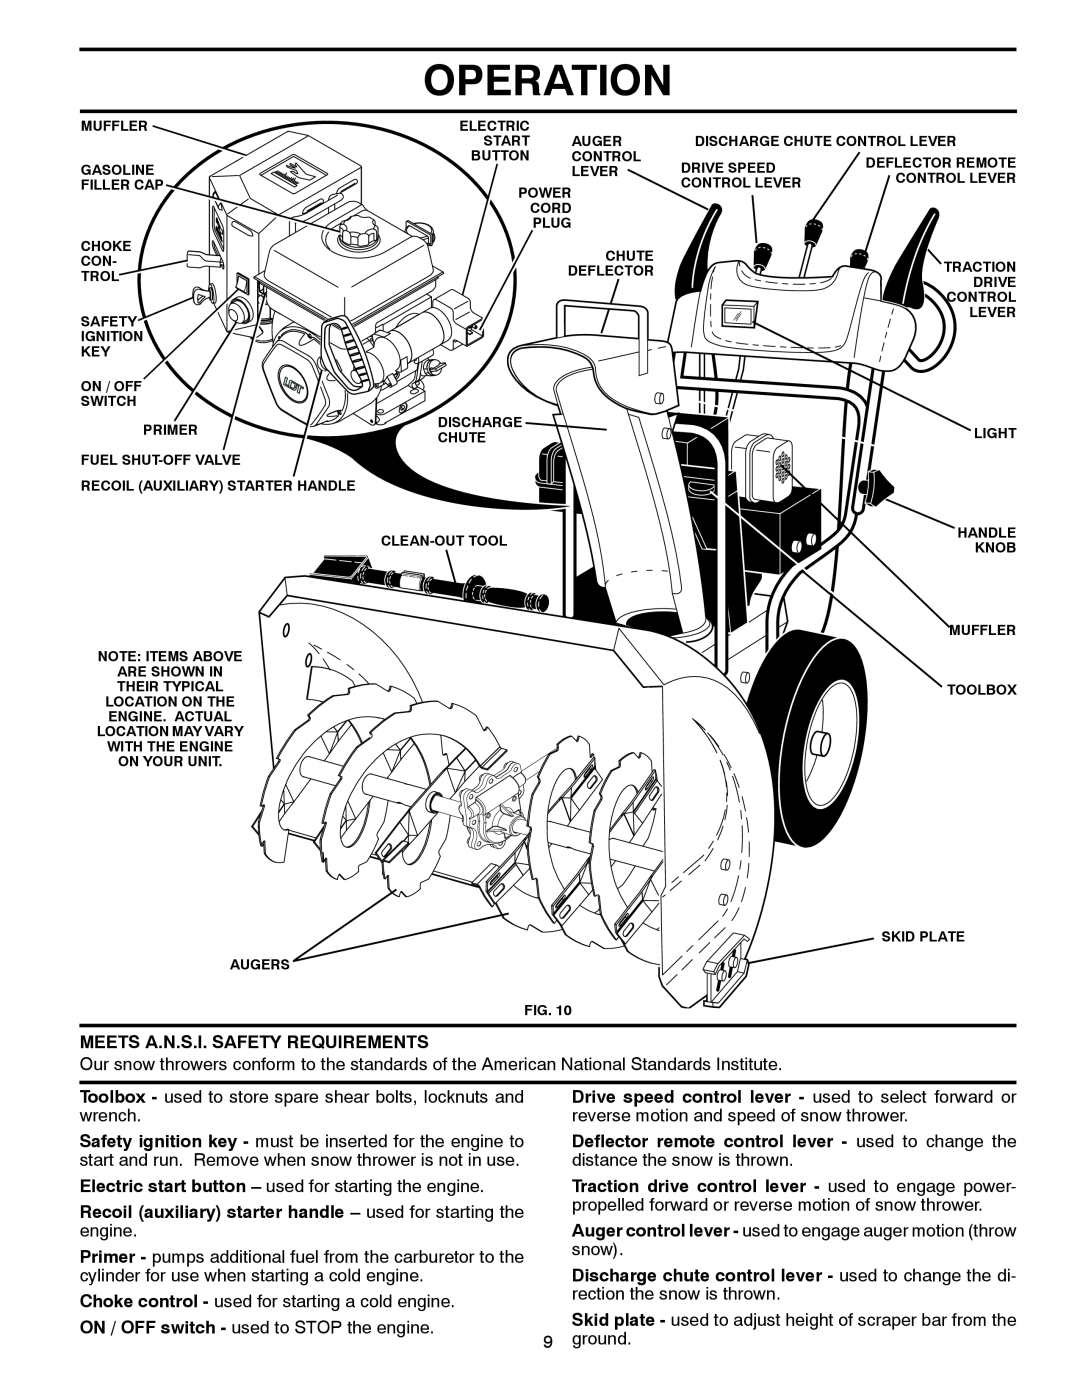 Husqvarna 924HV manual Operation, Meets A.N.S.I. Safety Requirements, Drive speed control lever - used to select forward or 